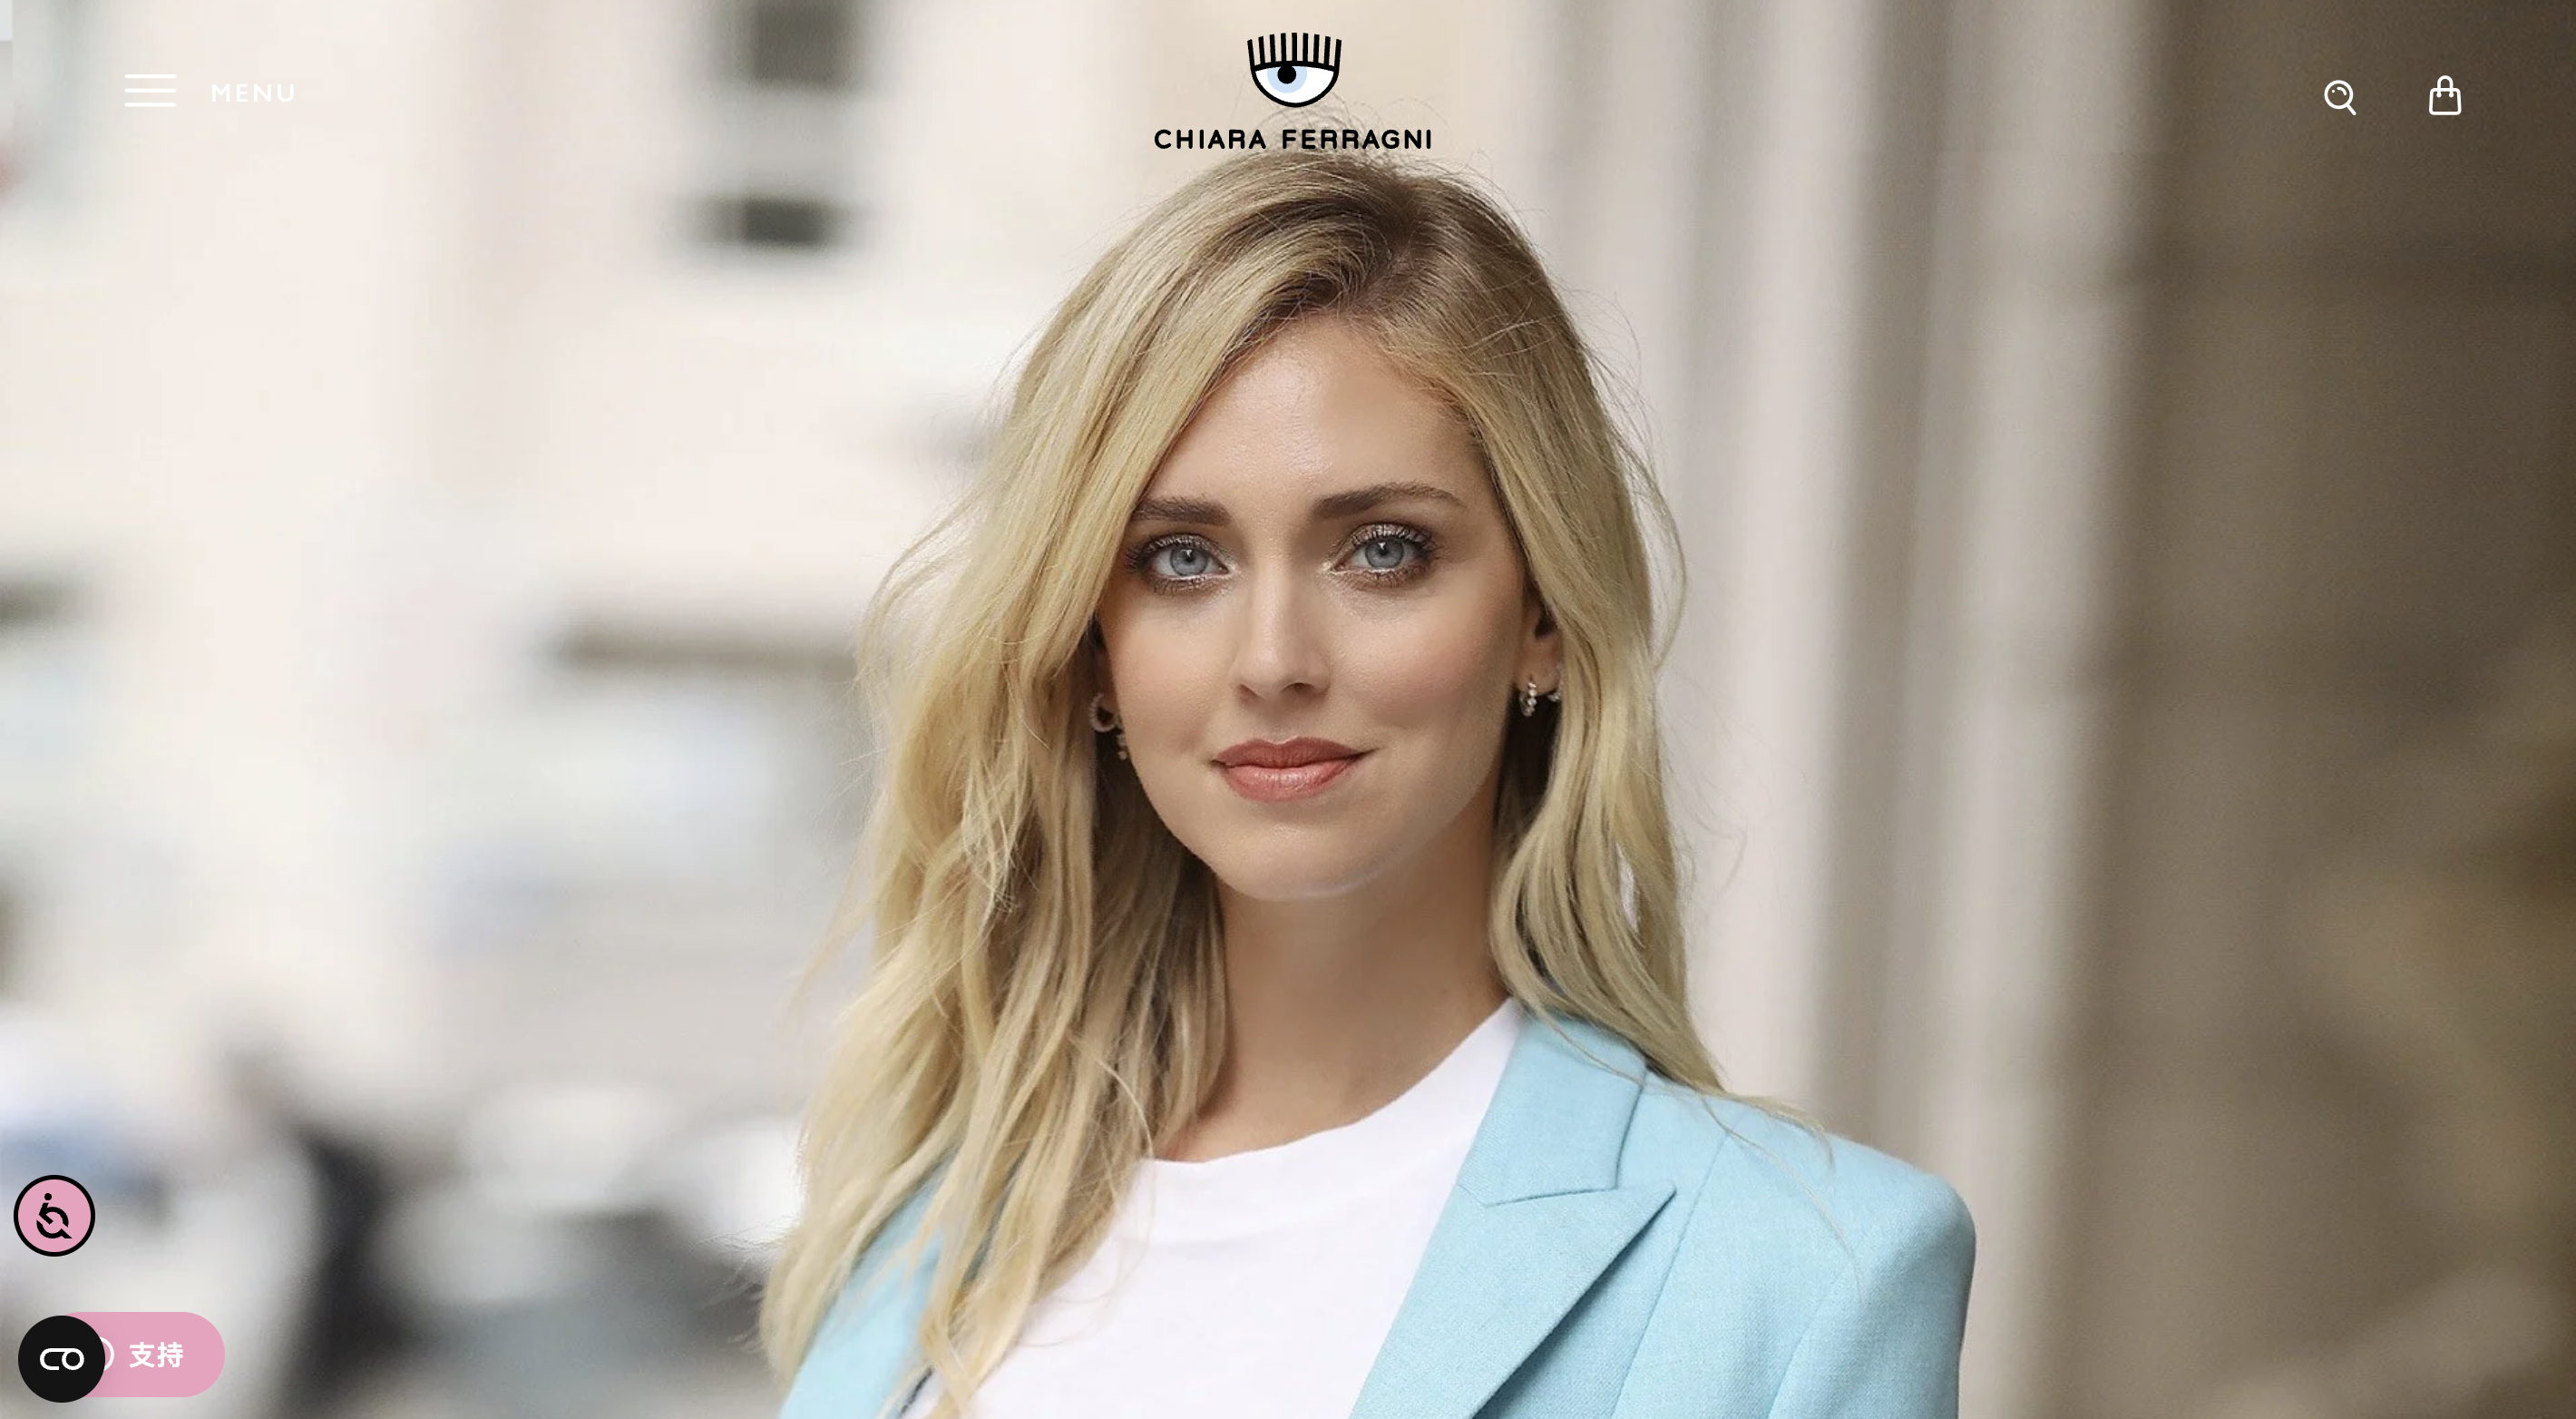 Chiara Ferragni’s Companies Doubled Revenue in 2022, No Plans to Sell Shares